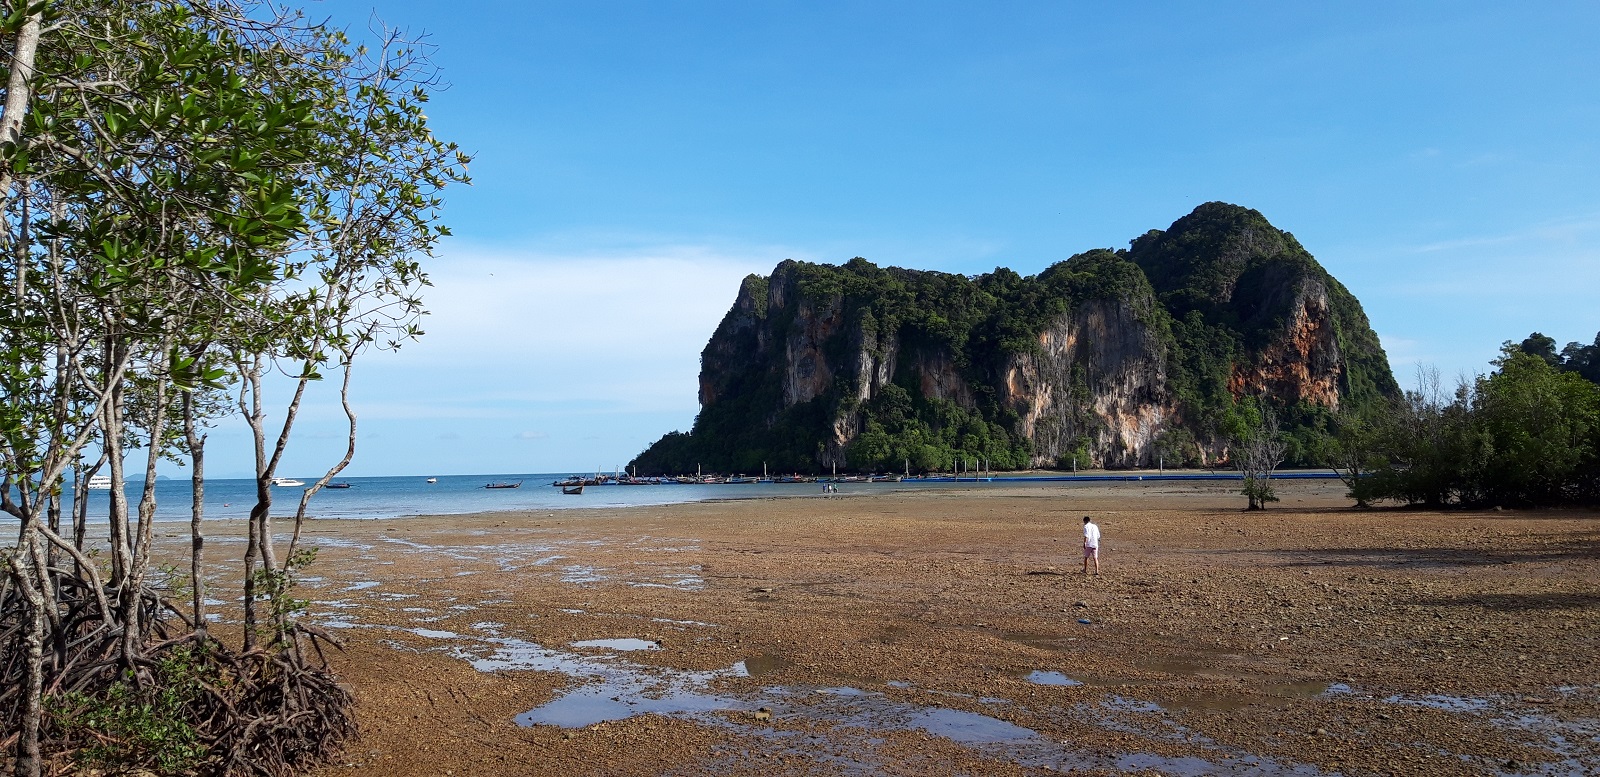 Walking to Railay beach- yes it’s possible